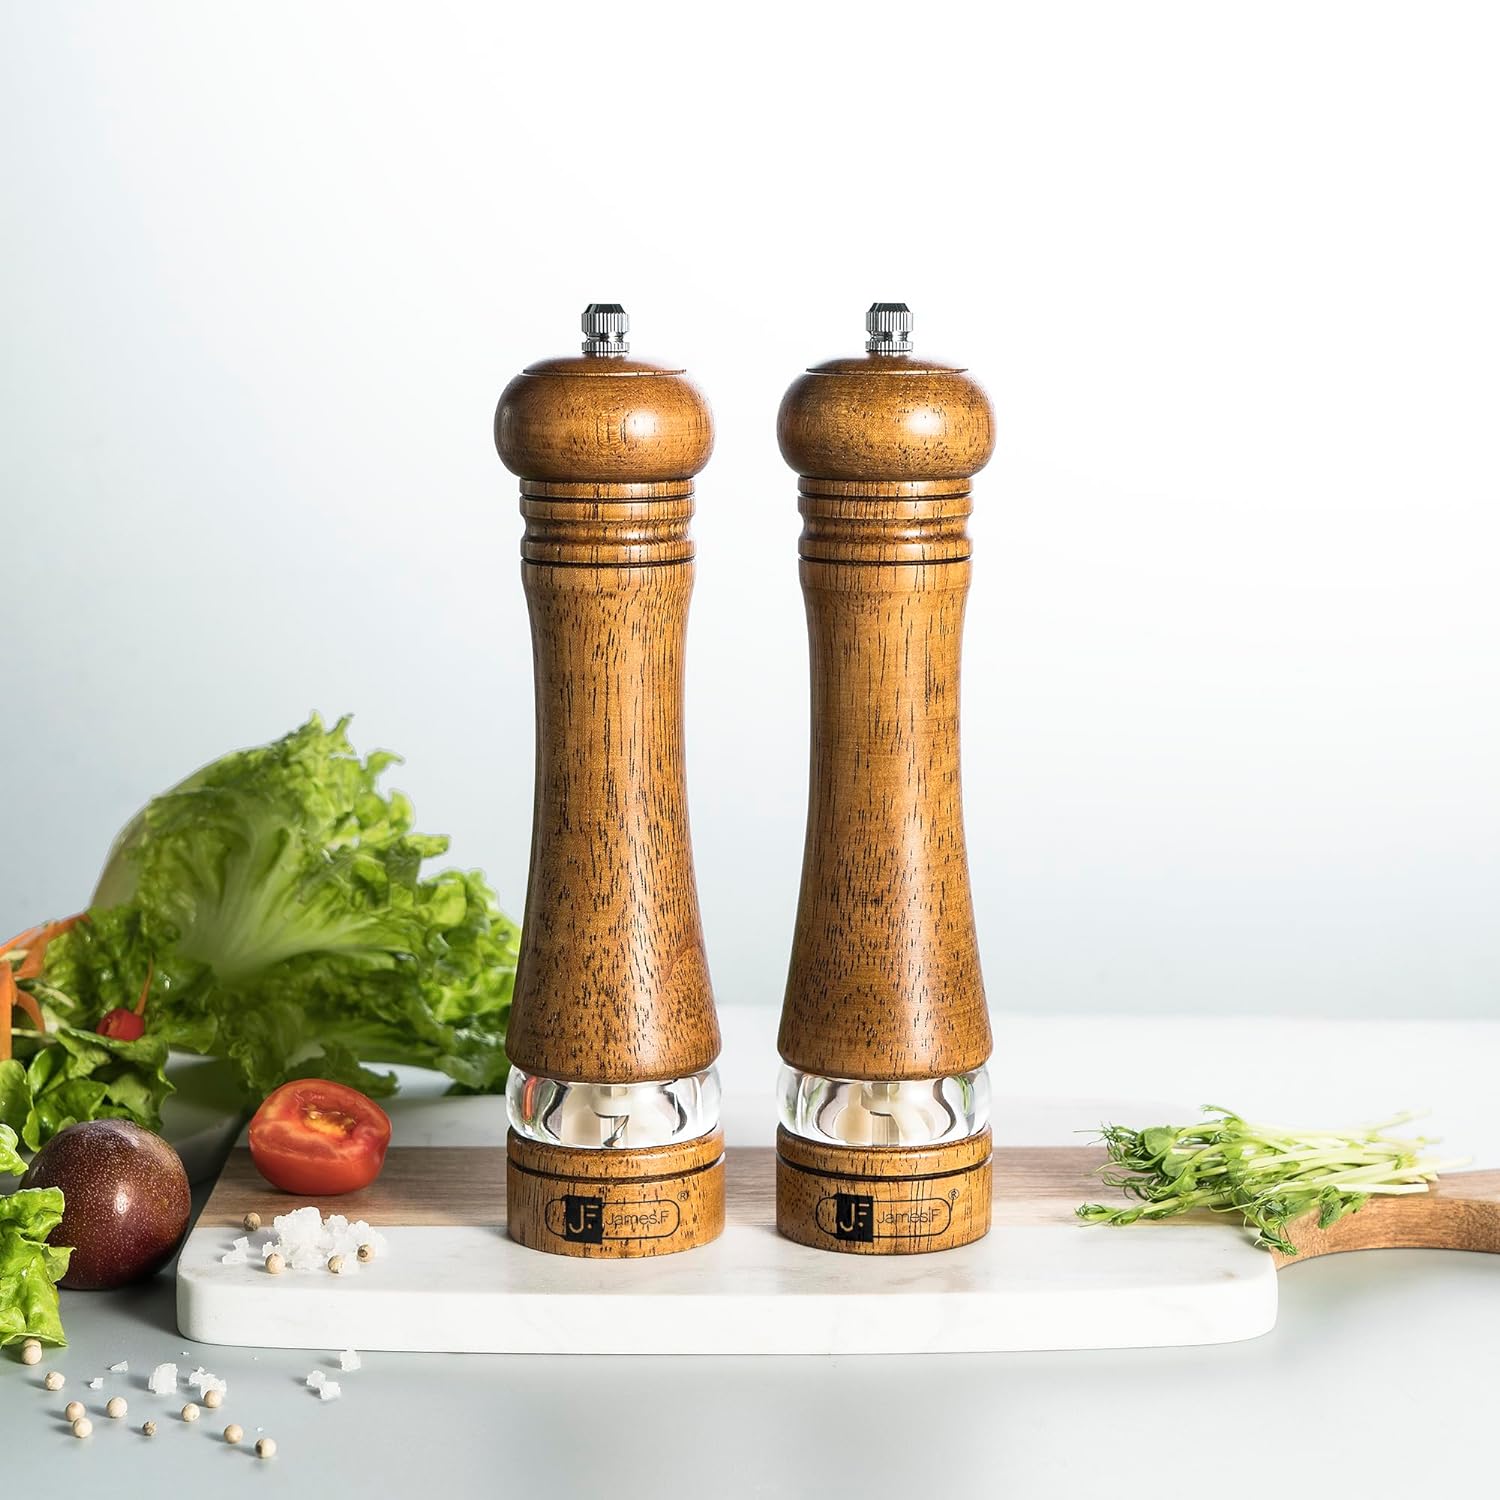 JF JAMES.F Wooden Salt and Pepper Grinder Set 8 inch Rubber Wood Salt and Pepper Mills Set of 2 with Acrylic Visible Window & Adjustable Ceramic Rotor